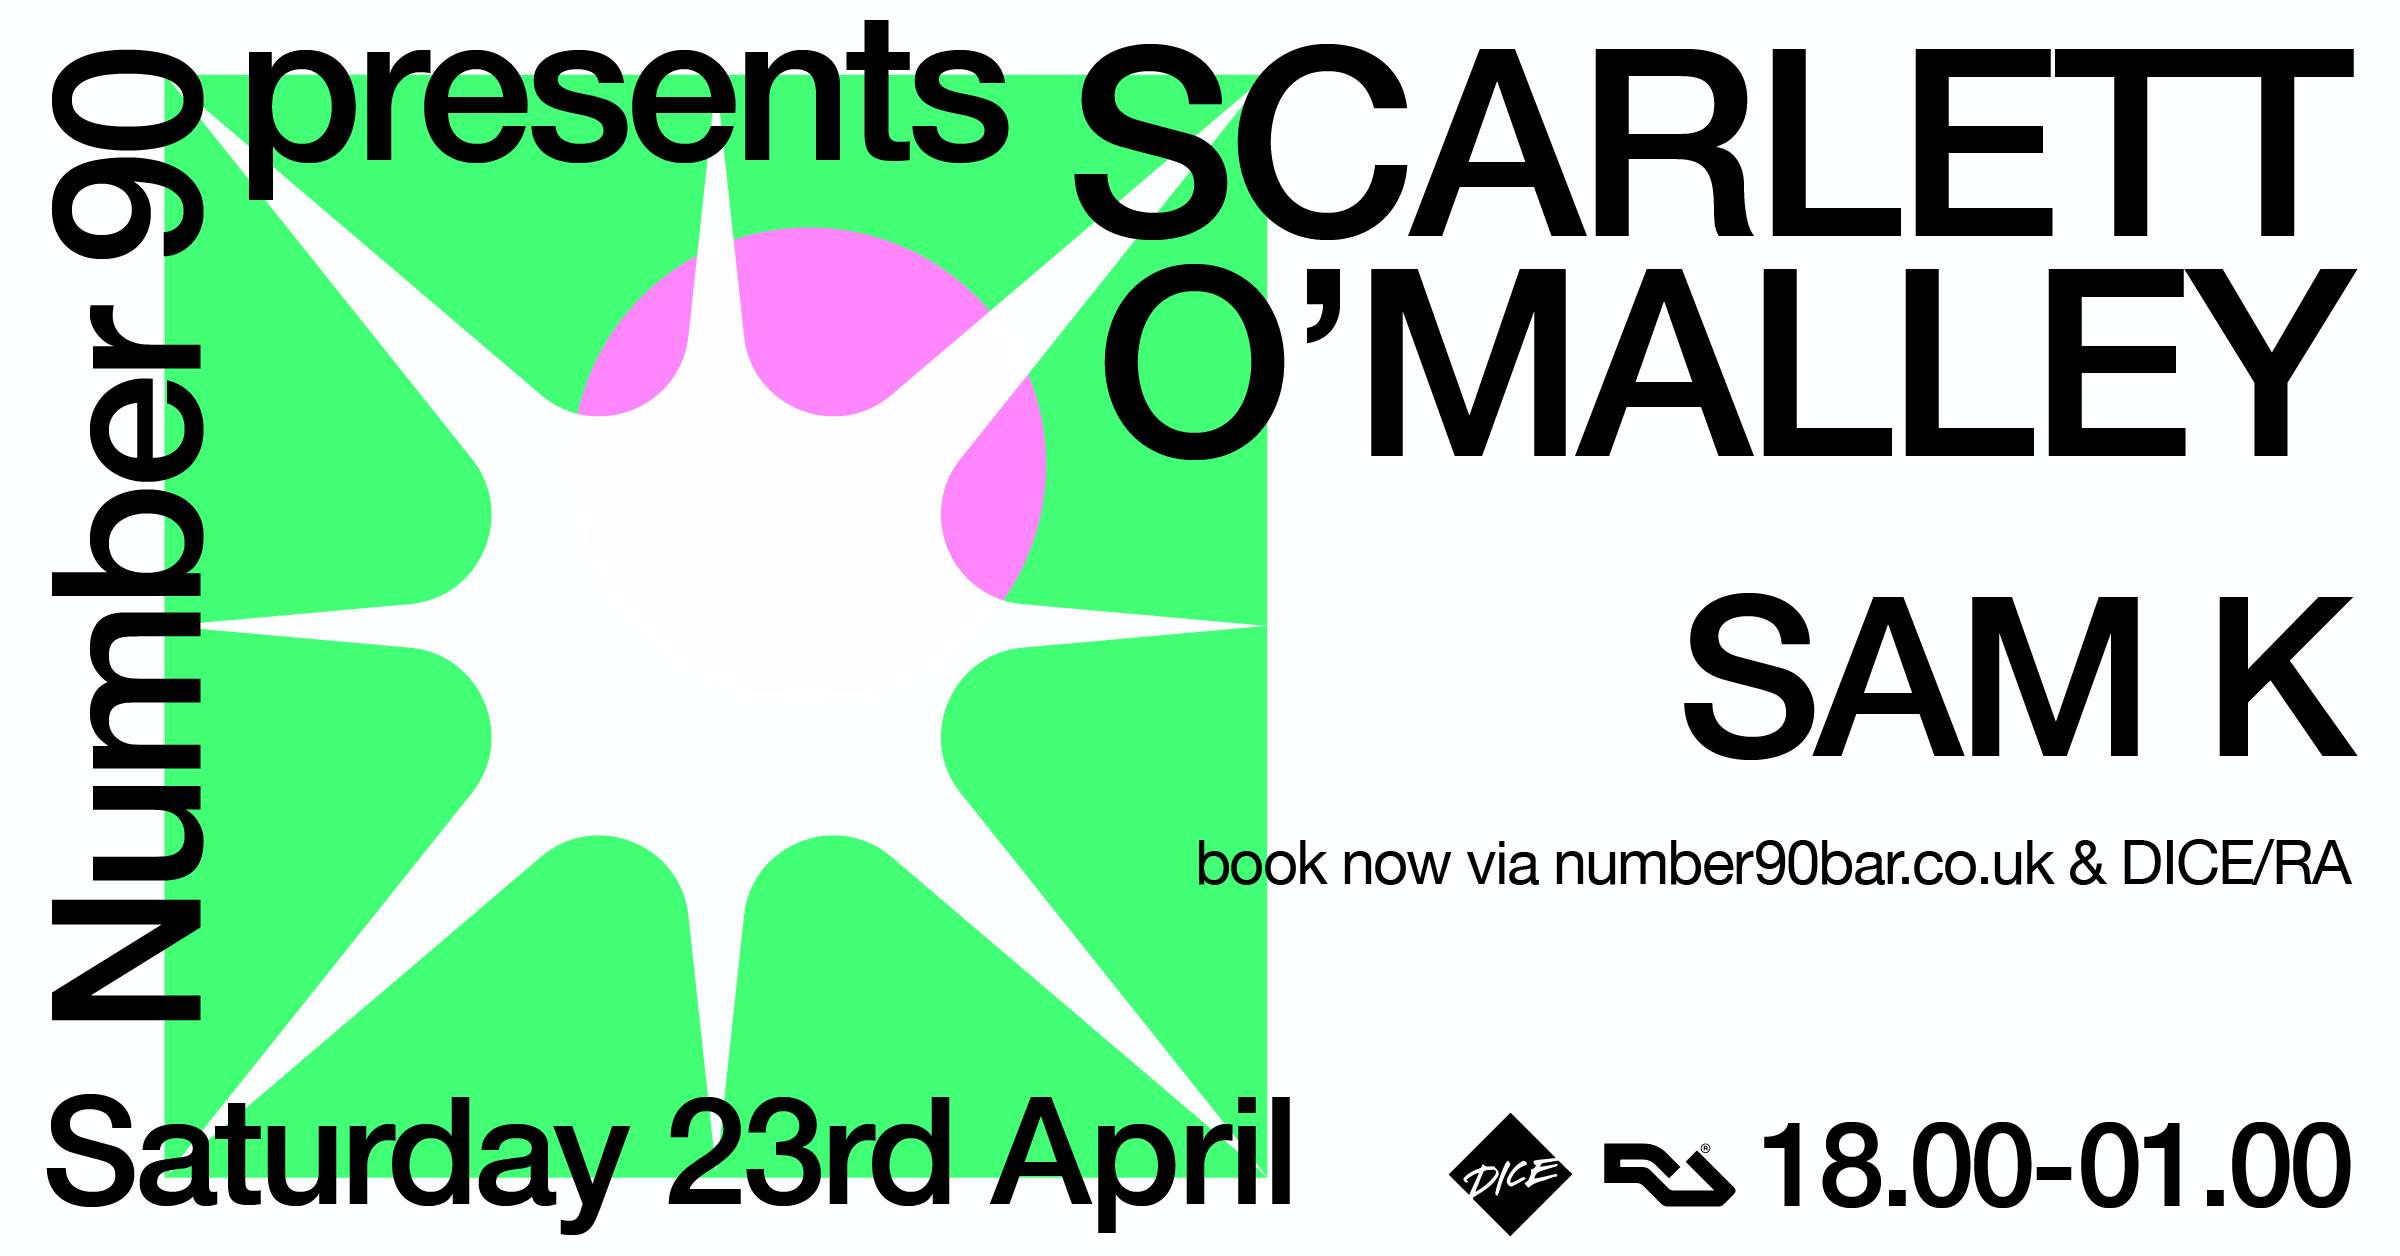 Number 90 presents: Scarlett O'Malley and Sam K - フライヤー表